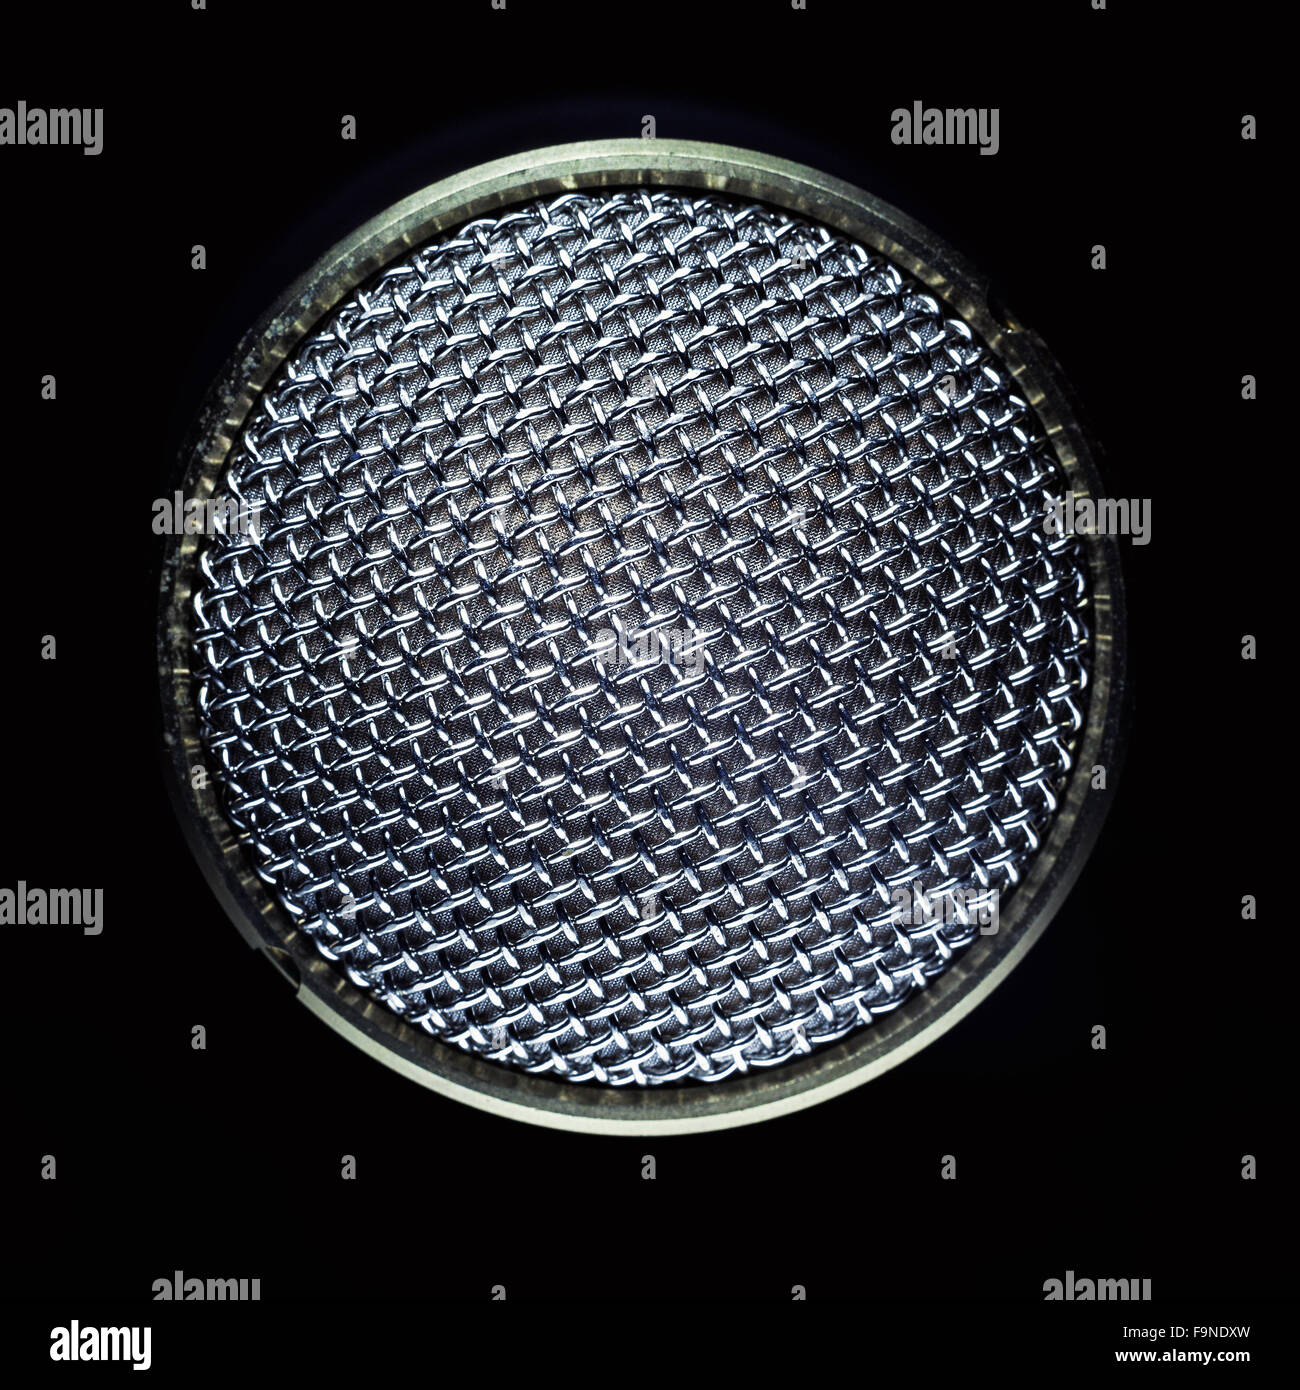 Closeup view of a modern microphone, highlighted parts by illumination. Stock Photo